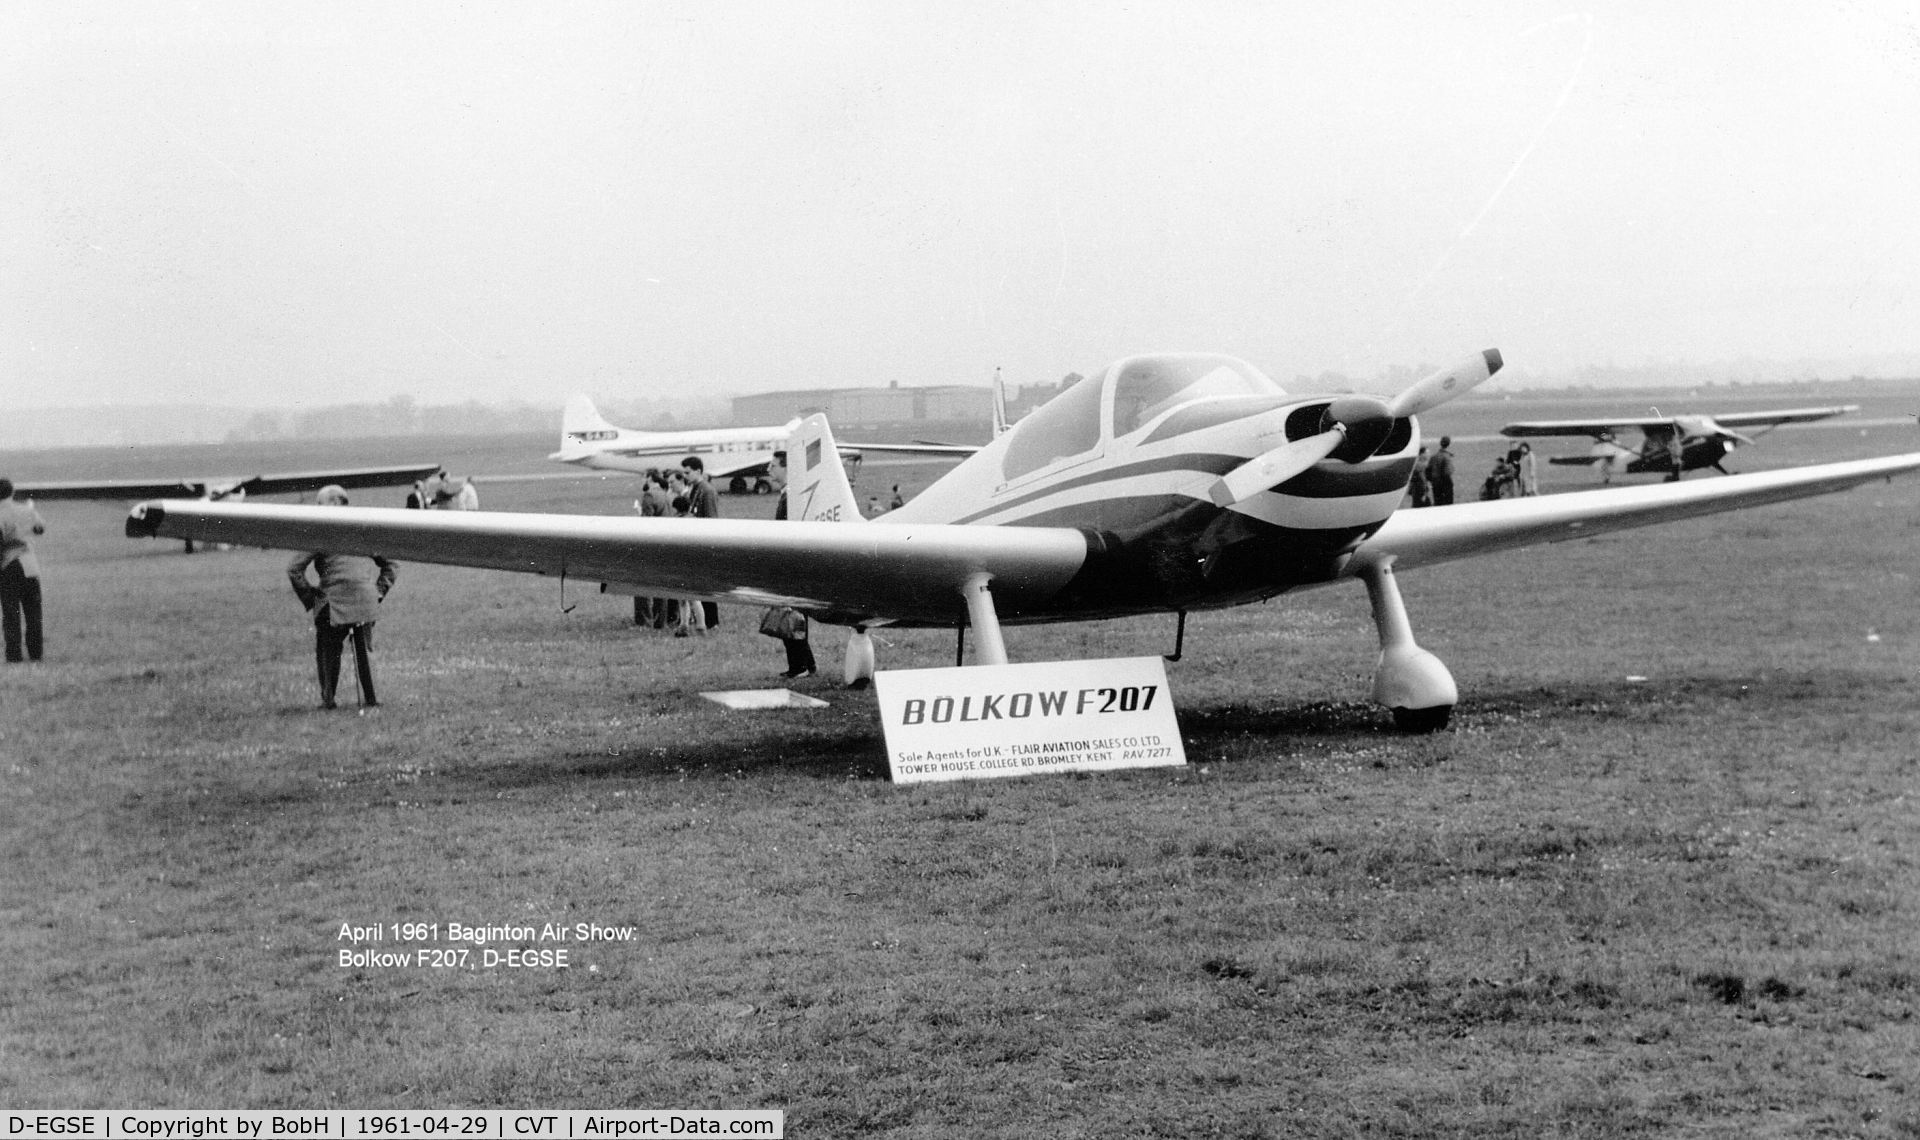 D-EGSE, 1960 Bolkow Bo-207 C/N 202, The Bolkow F207, D-EGSE is shown here at Baginton sales weekend in April 1961. Bolkow changed the model name to BO207 the following July.